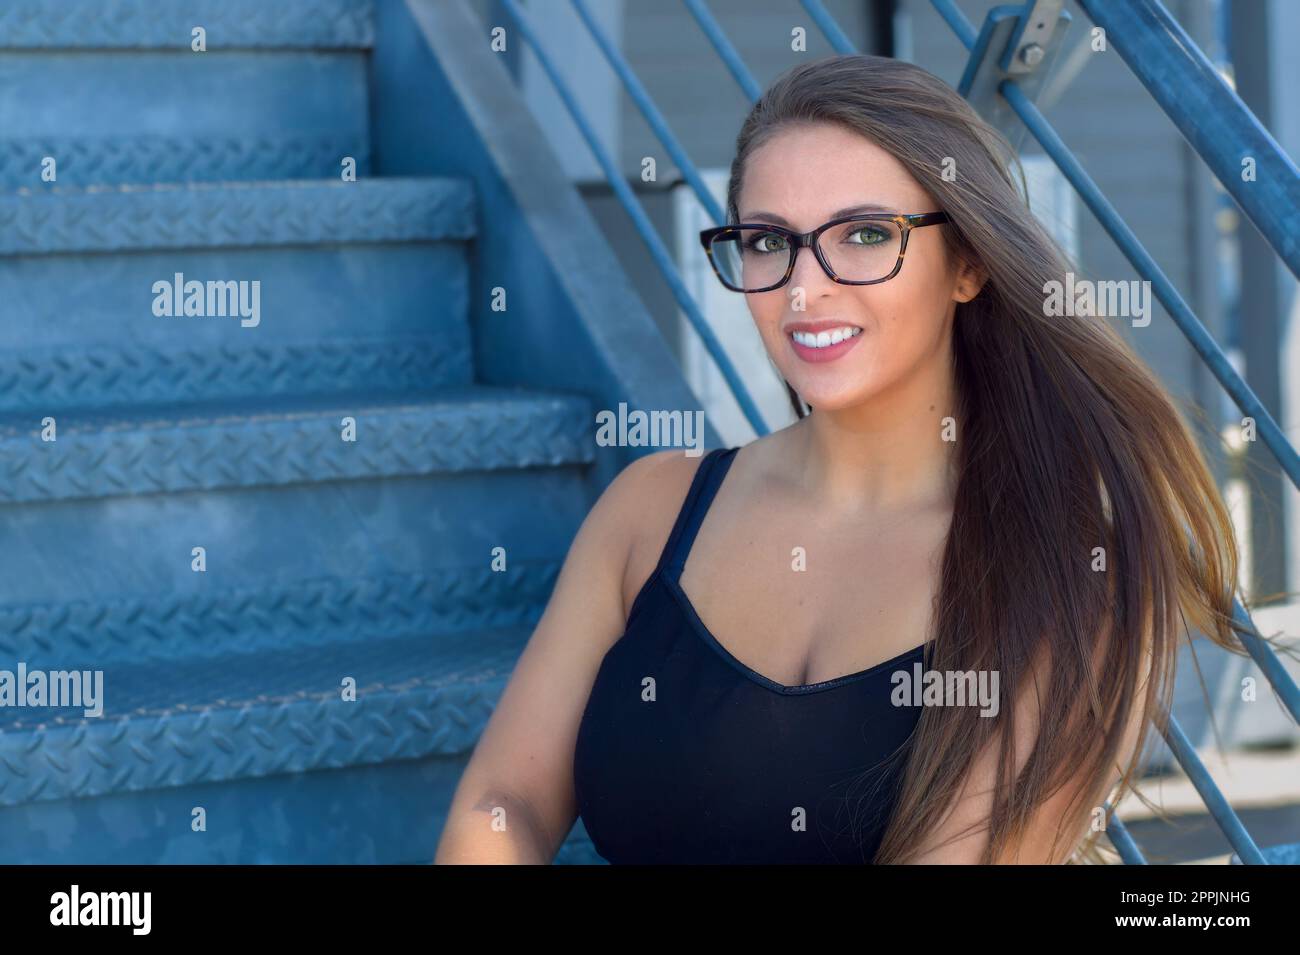 young woman sitting in metal staircase outside lifestyle smiling student 20s Stock Photo